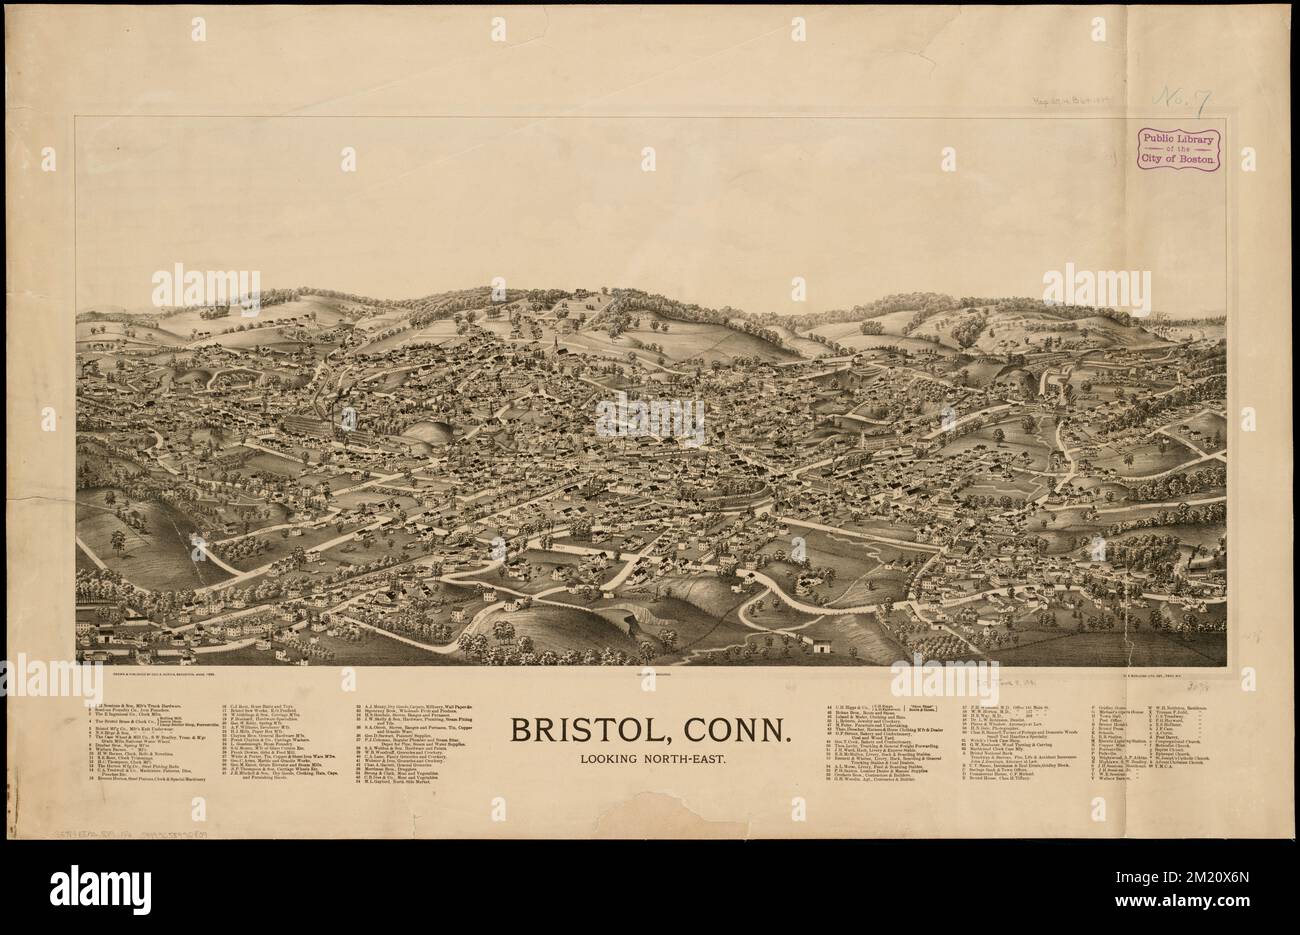 Bristol, Conn : looking north-east , Bristol Conn., Aerial views Norman B. Leventhal Map Center Collection Stock Photo